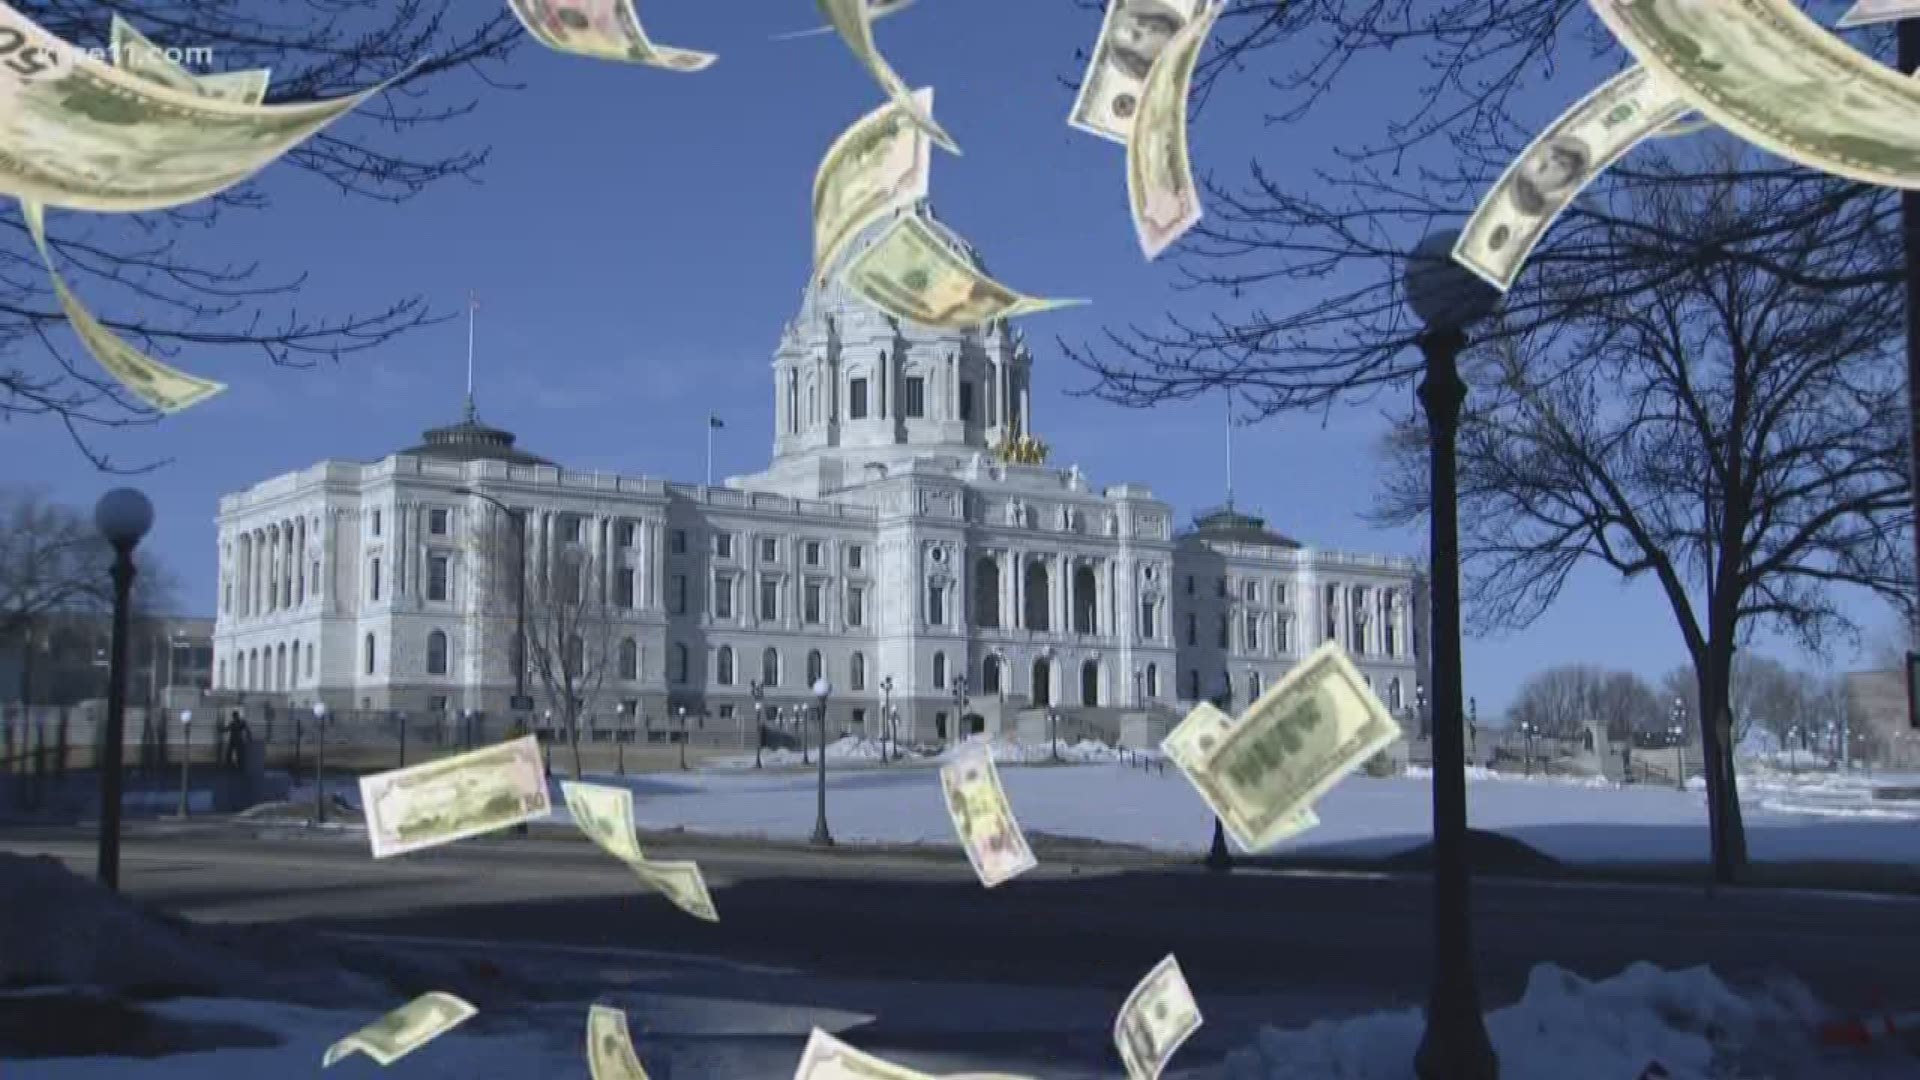 The $1.5 billion surplus gives Gov.-elect Tim Walz and the Legislature more room for new spending initiatives, tax cuts or some combination of both.